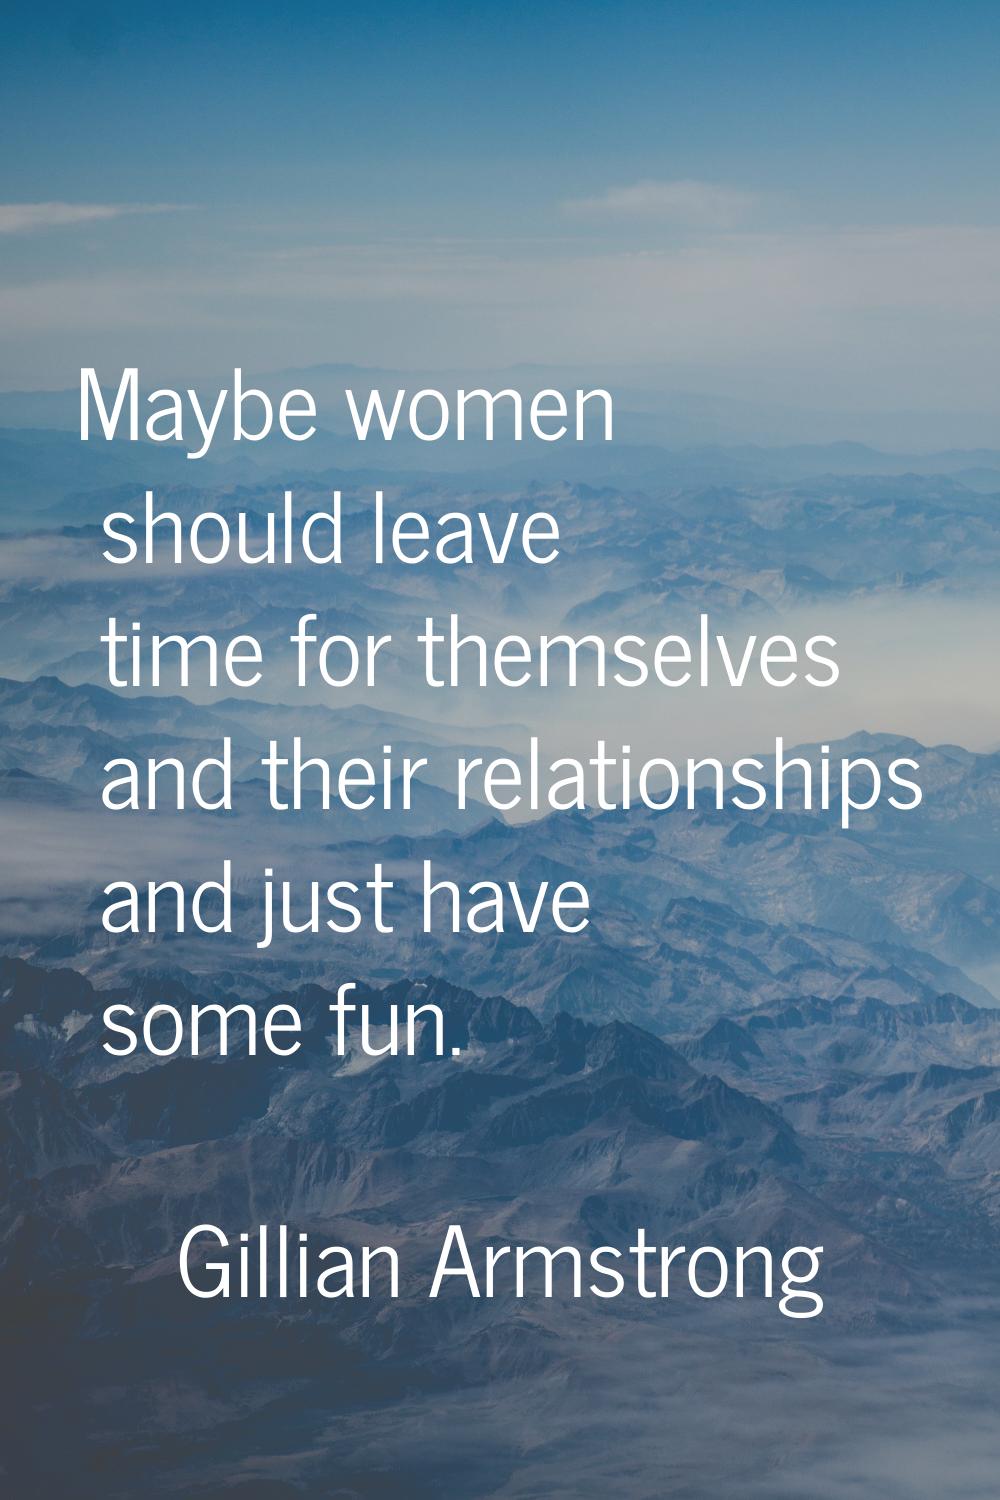 Maybe women should leave time for themselves and their relationships and just have some fun.